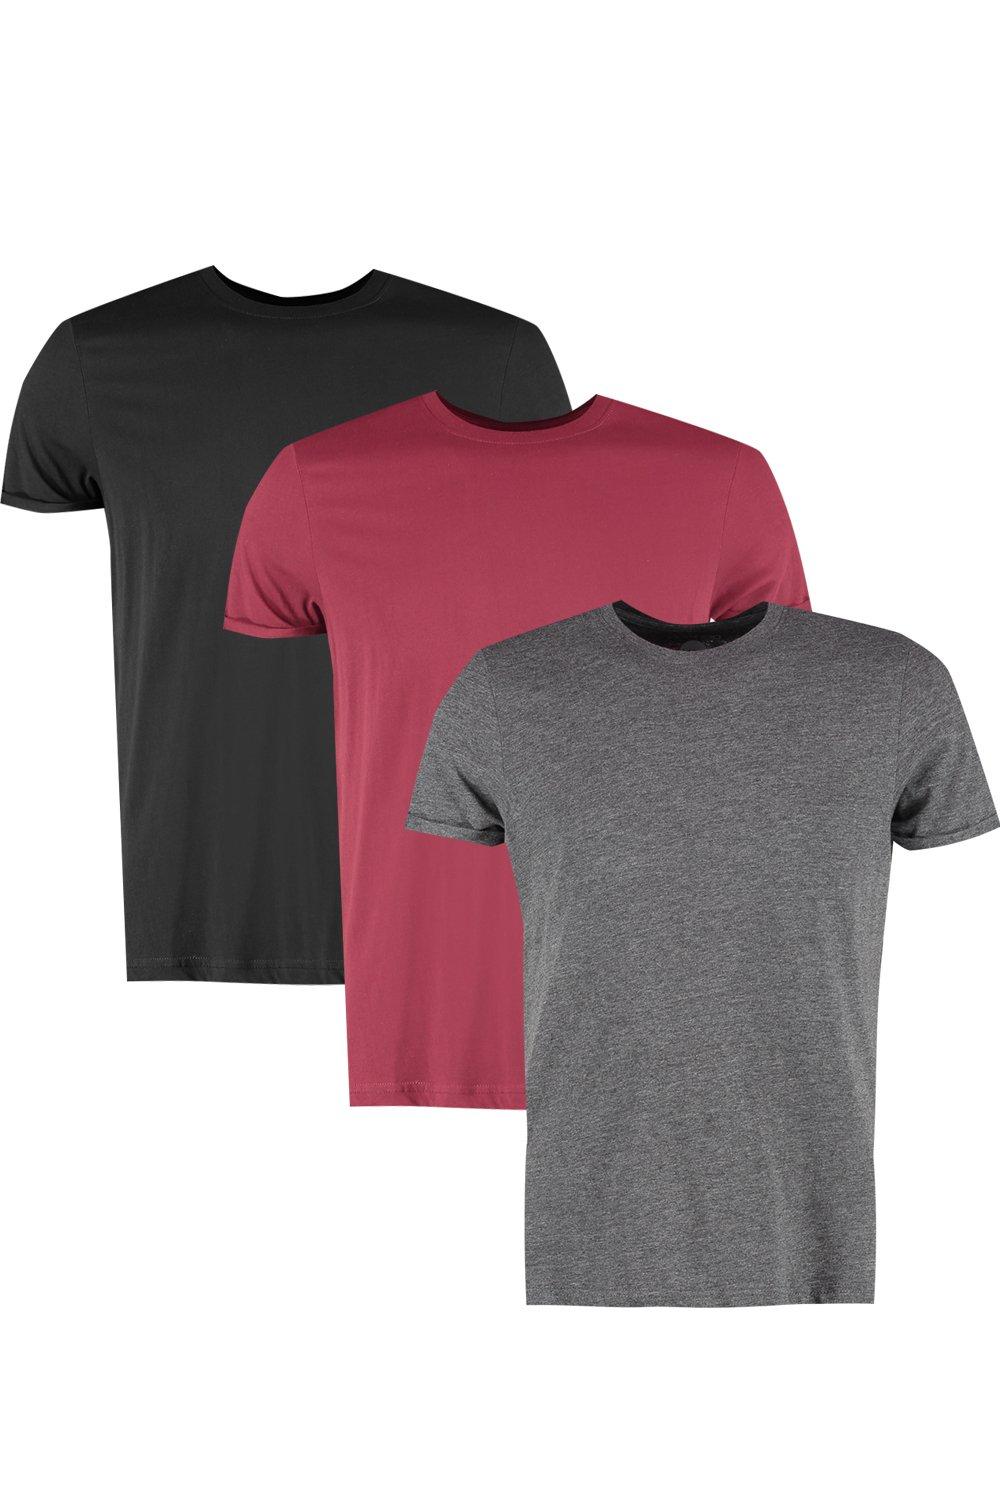 3 Pack Crew Neck T Shirts in Slim Fit - boohooMAN